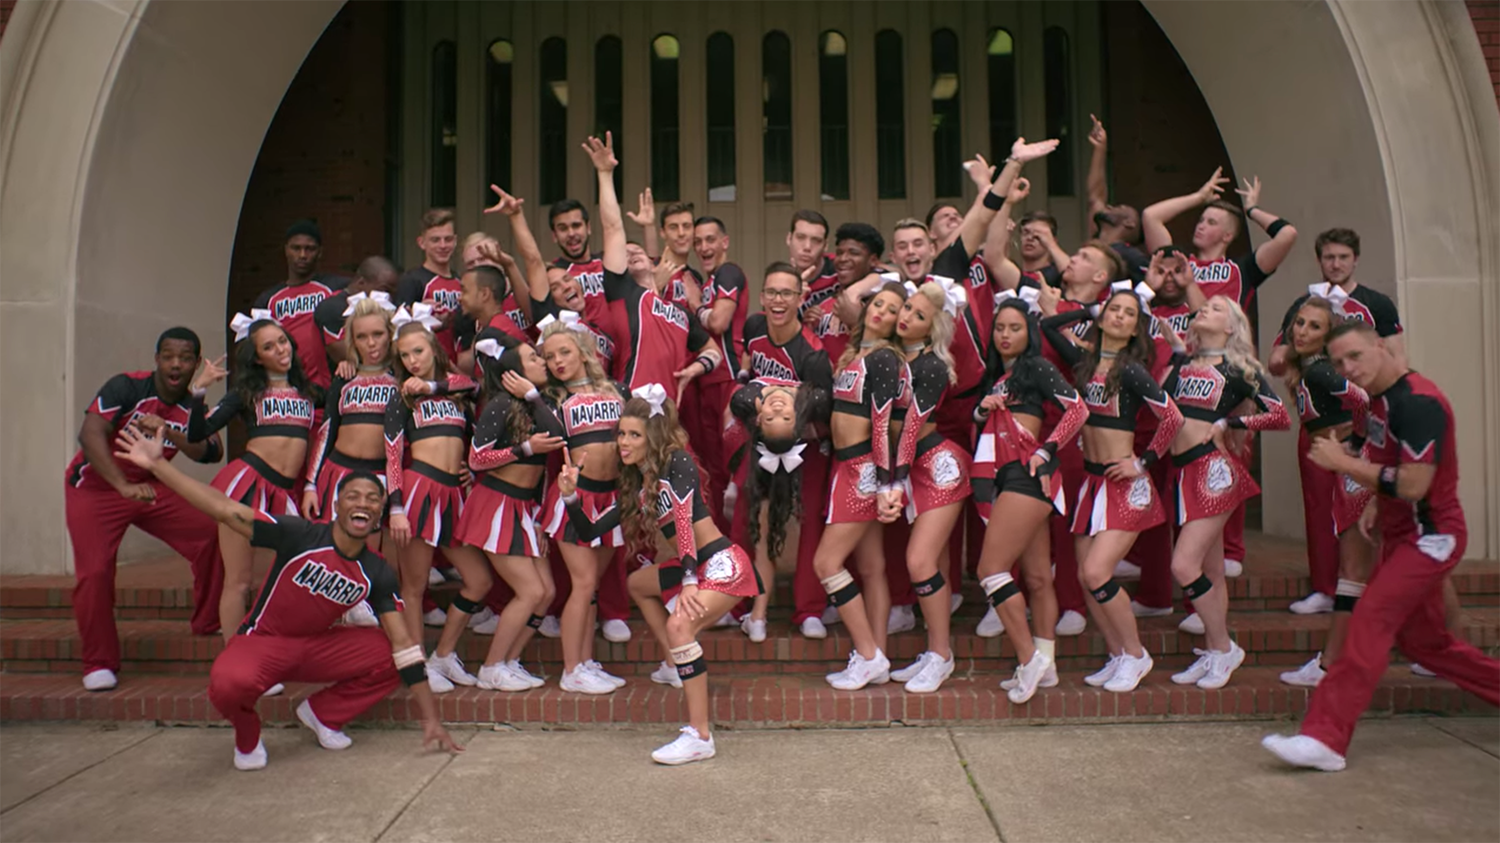 The Daytona Routine From Netflix's "Cheer" Is On YouTube